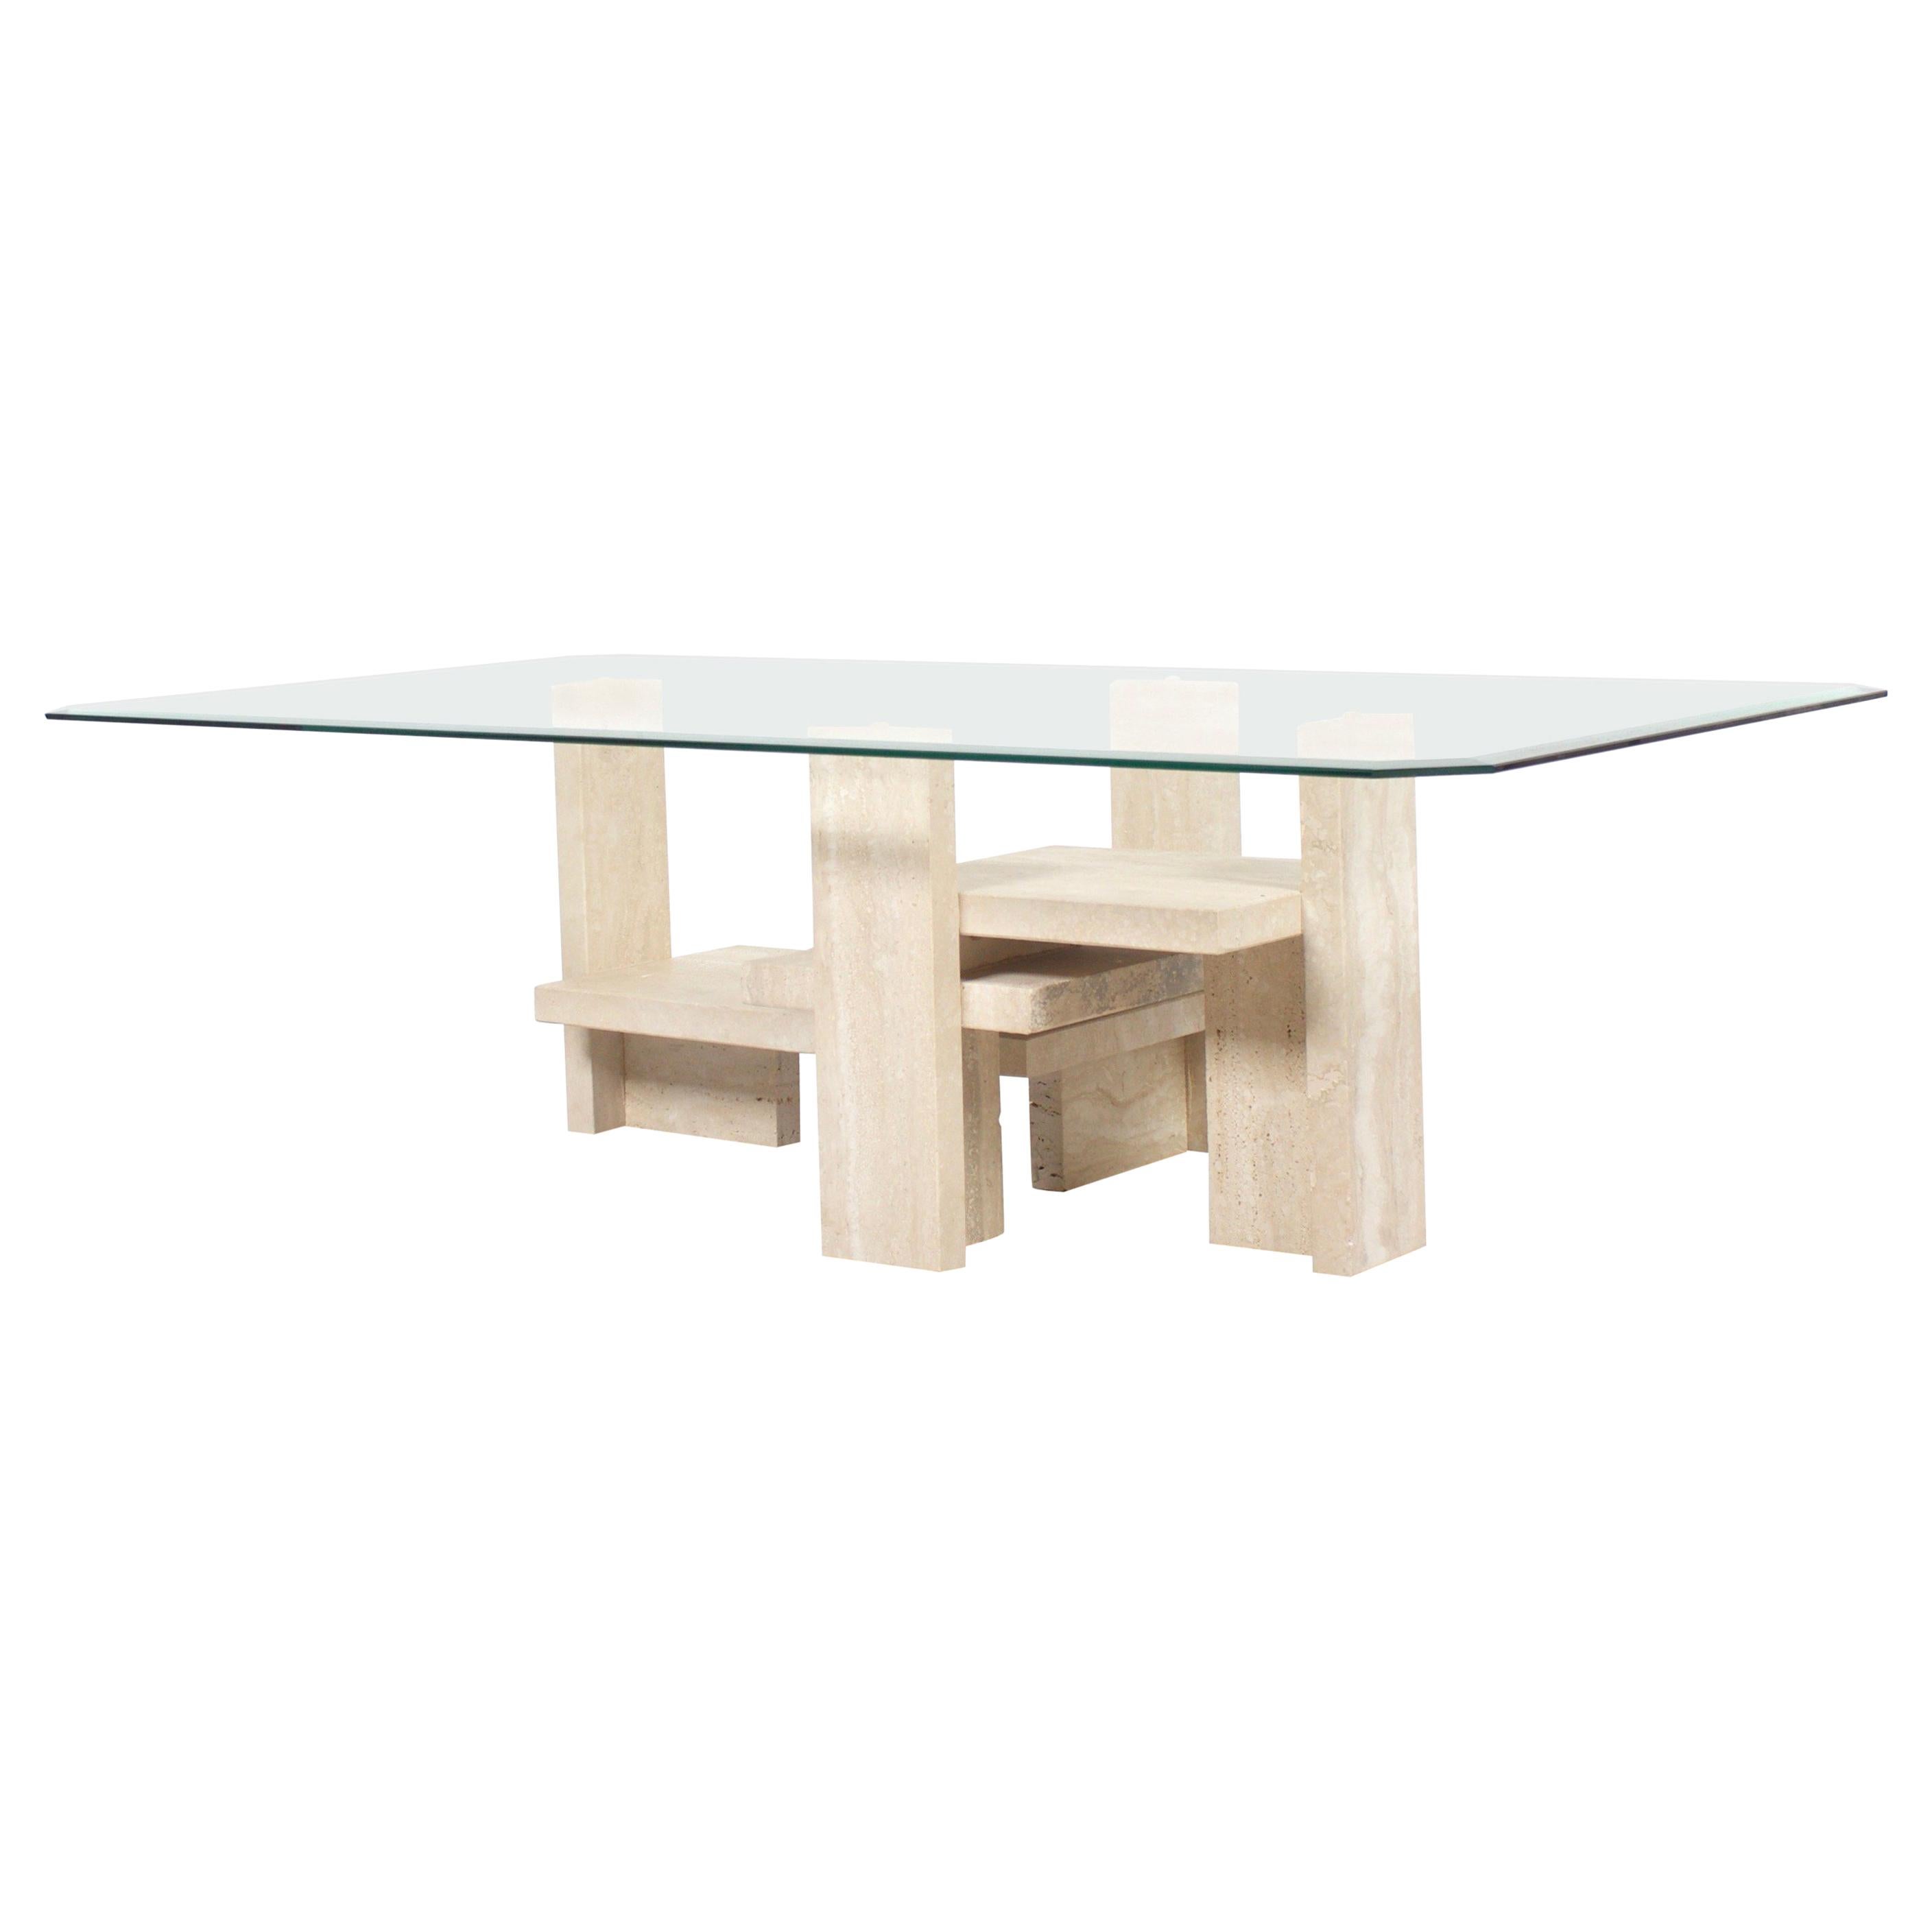 Willy Ballez Travertine and Glass Coffee Table, Belgium